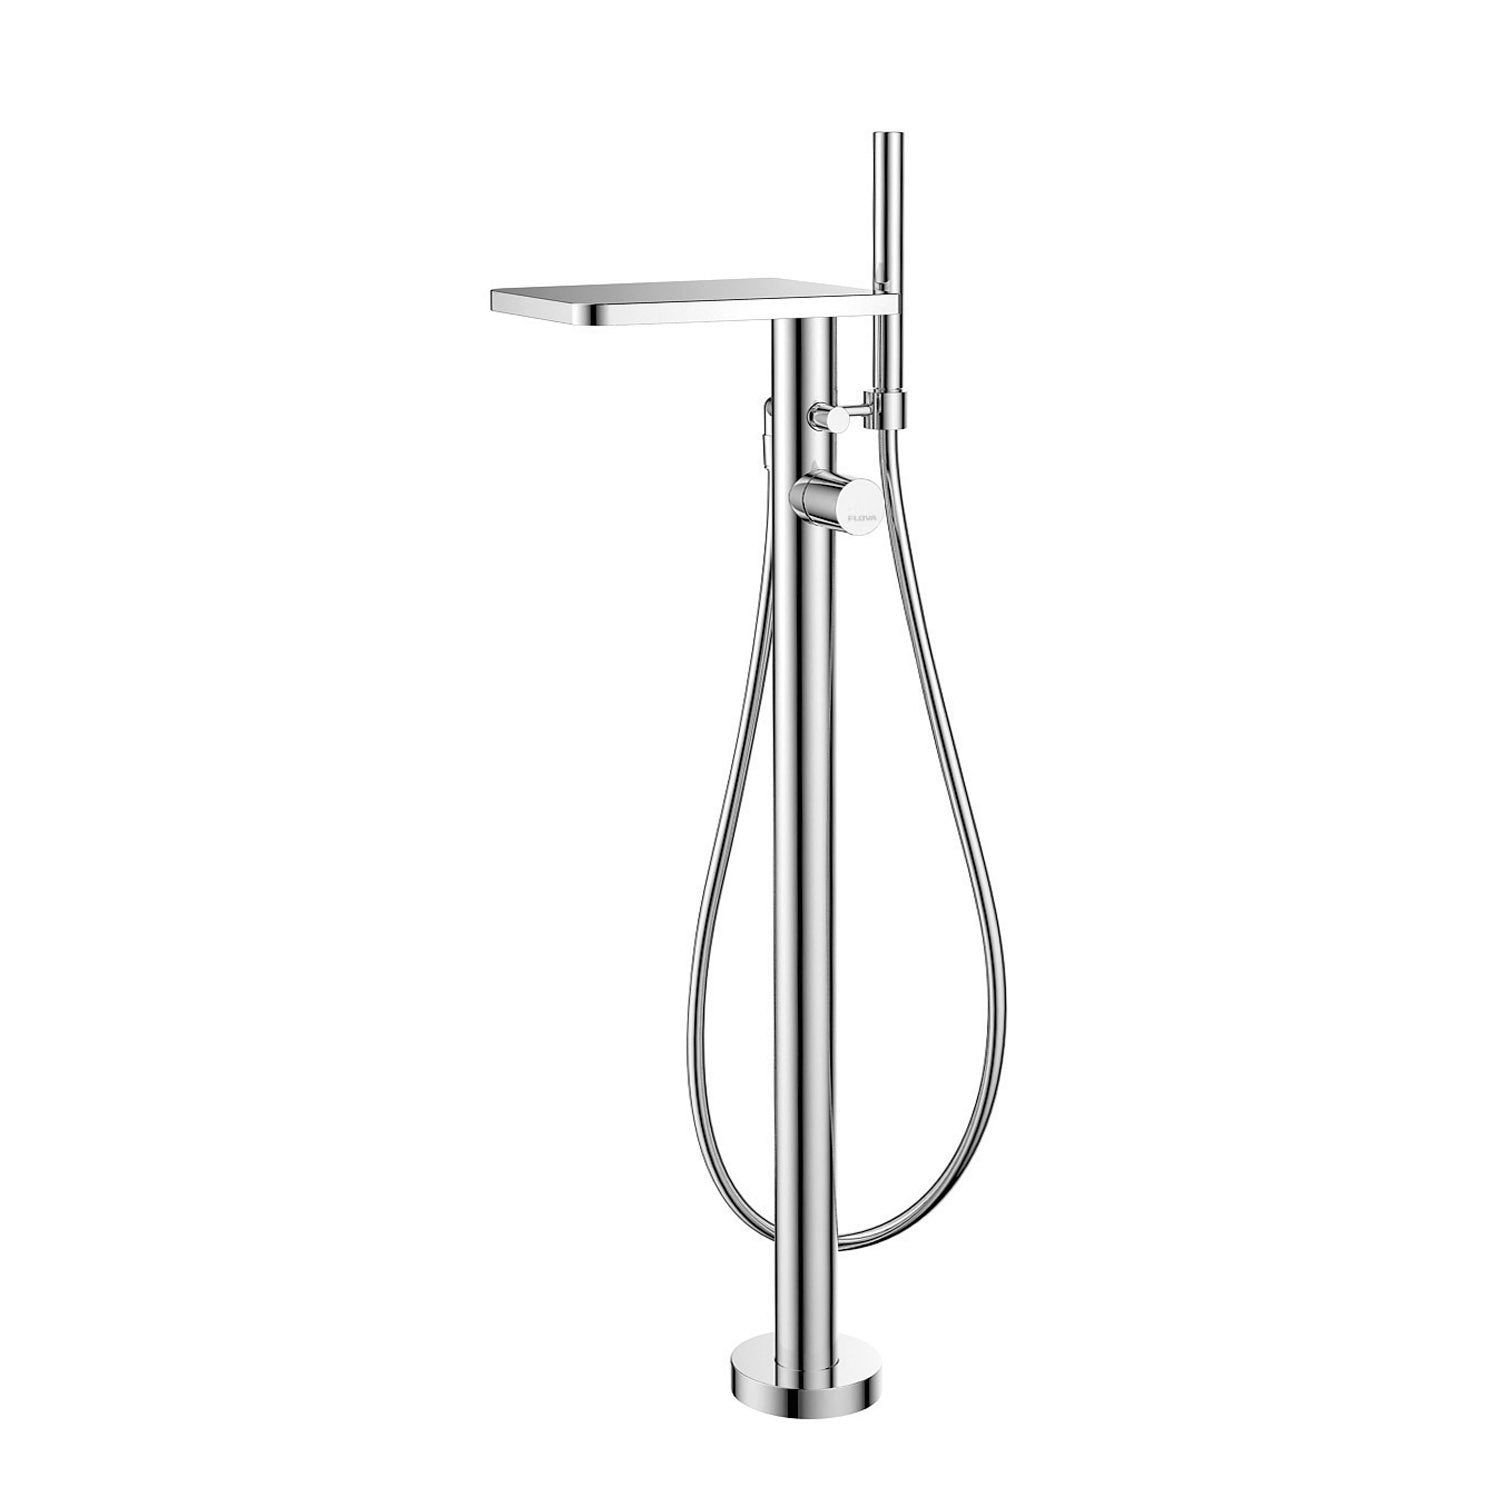 DAX Freestanding Hot Tub Filler with Hand Shower and Waterfall Spout, Brass Body, Chrome Finish, 7-7/8 x 36-1/8 Inches (DAX-8180)